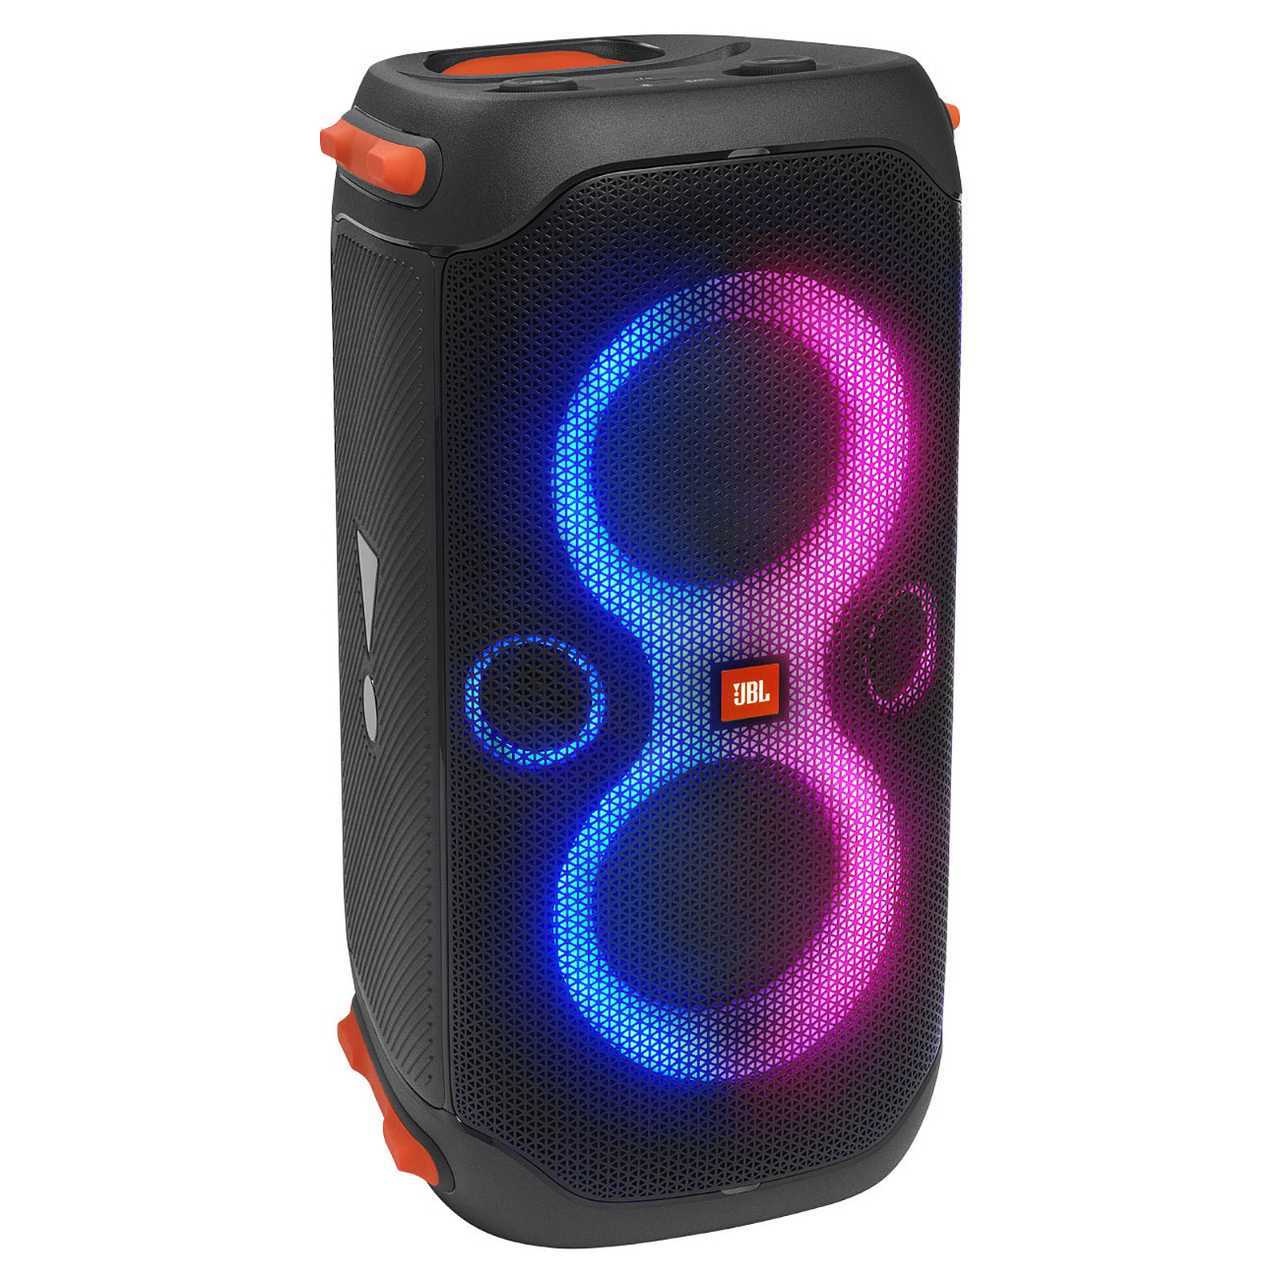 JBL Partybox 110 Portable party speaker with 160W powerful sound, built-in lights and splashproof design